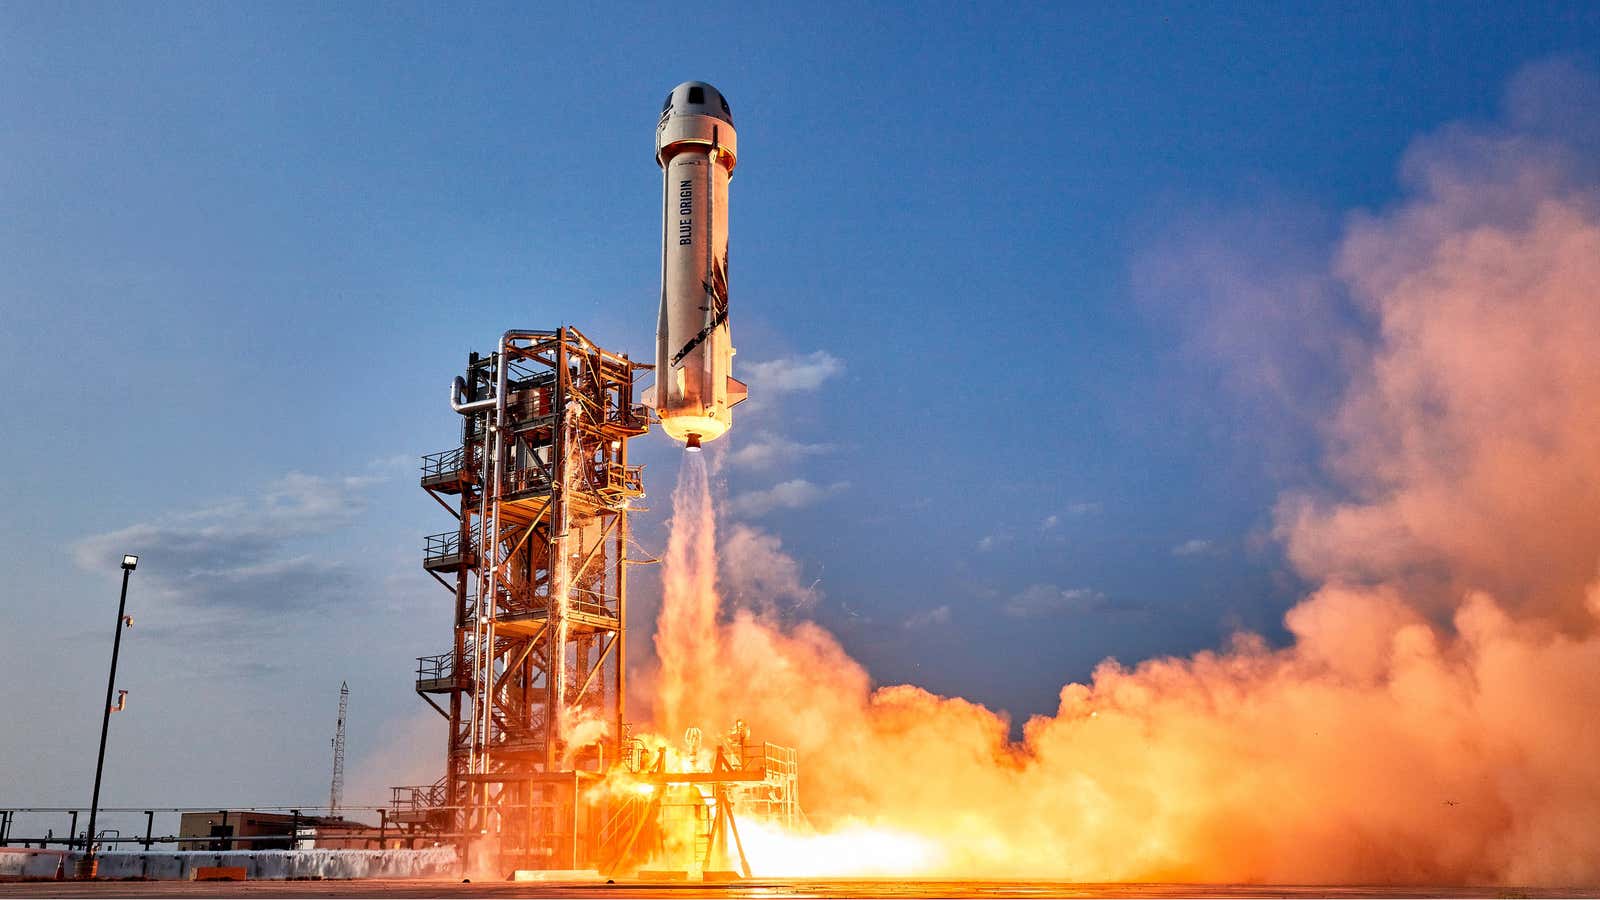 A Blue Origin New Shepard rocket takes off carrying four passengers, including Jeff Bezos, on July 20, 2021.